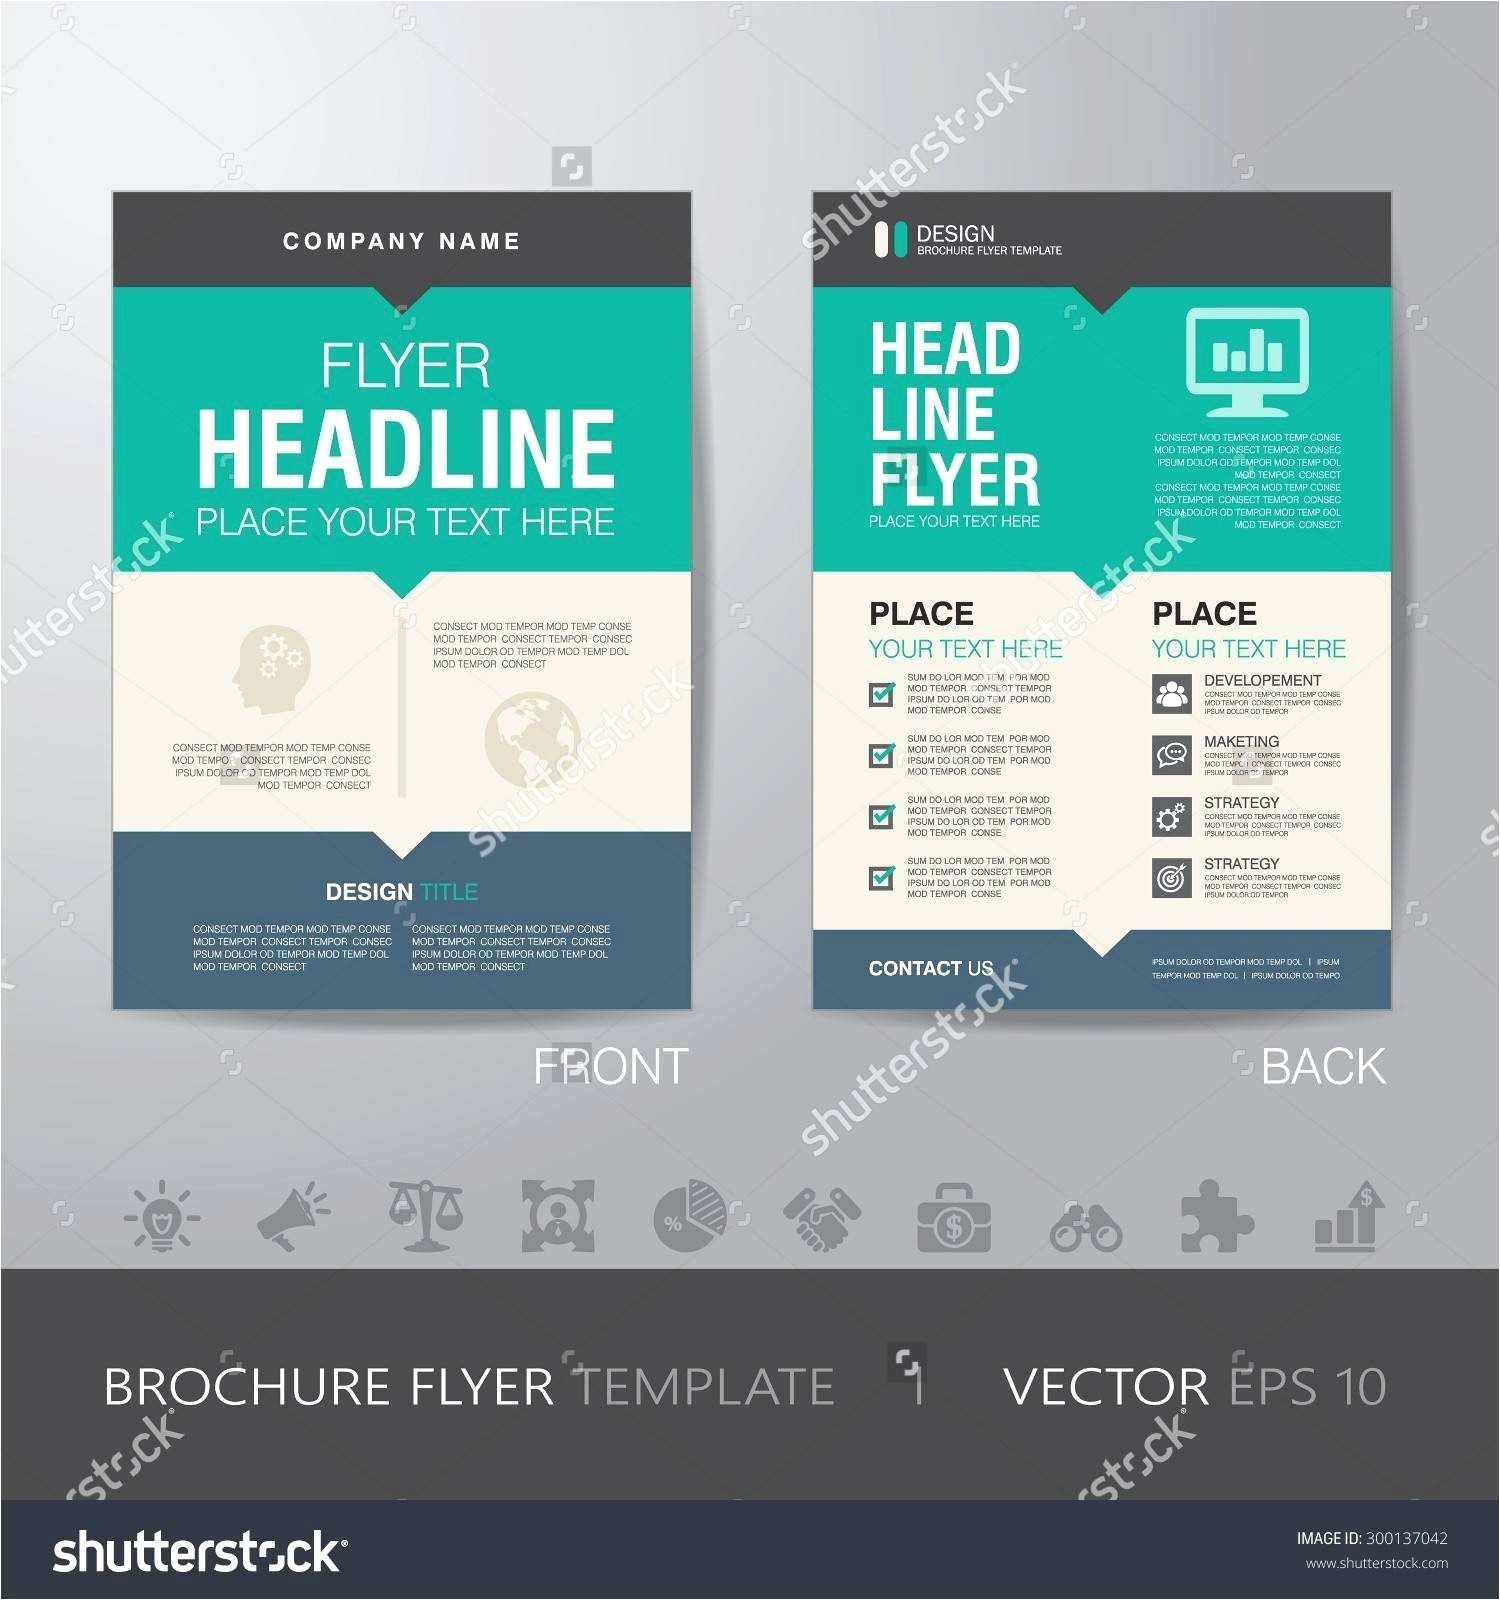 Microsoft Publisher Business Cards Templates Of Microsoft Business Card Templates